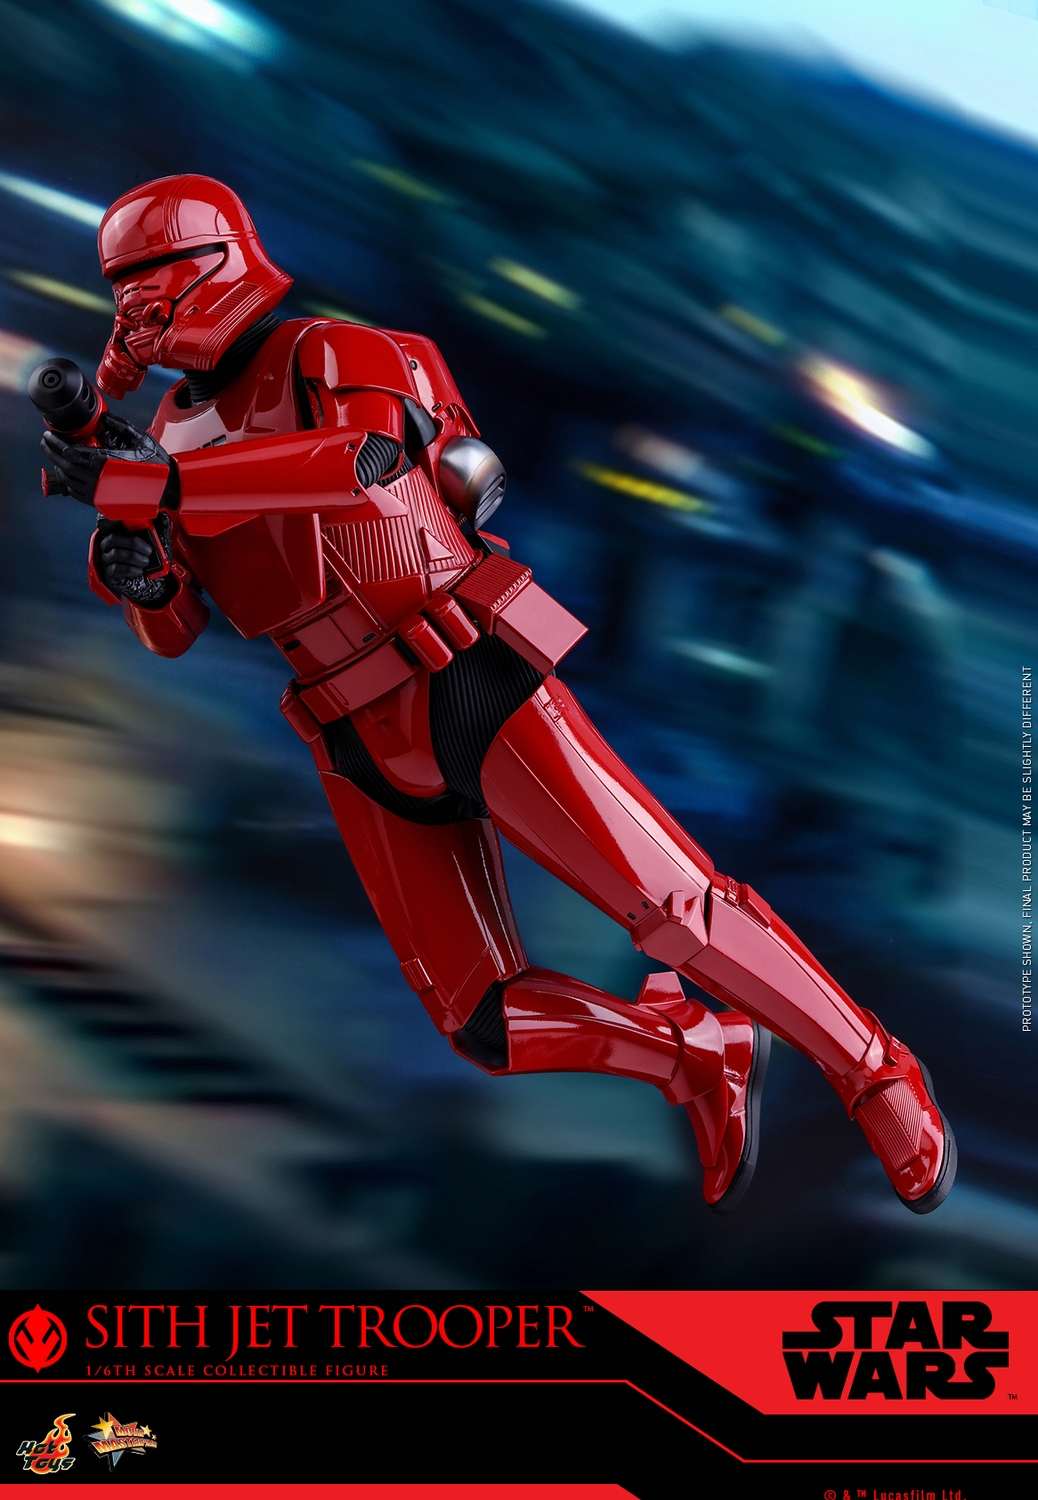 hot-toys-sith-jet-trooper-collectible-figure-121219-011.jpg